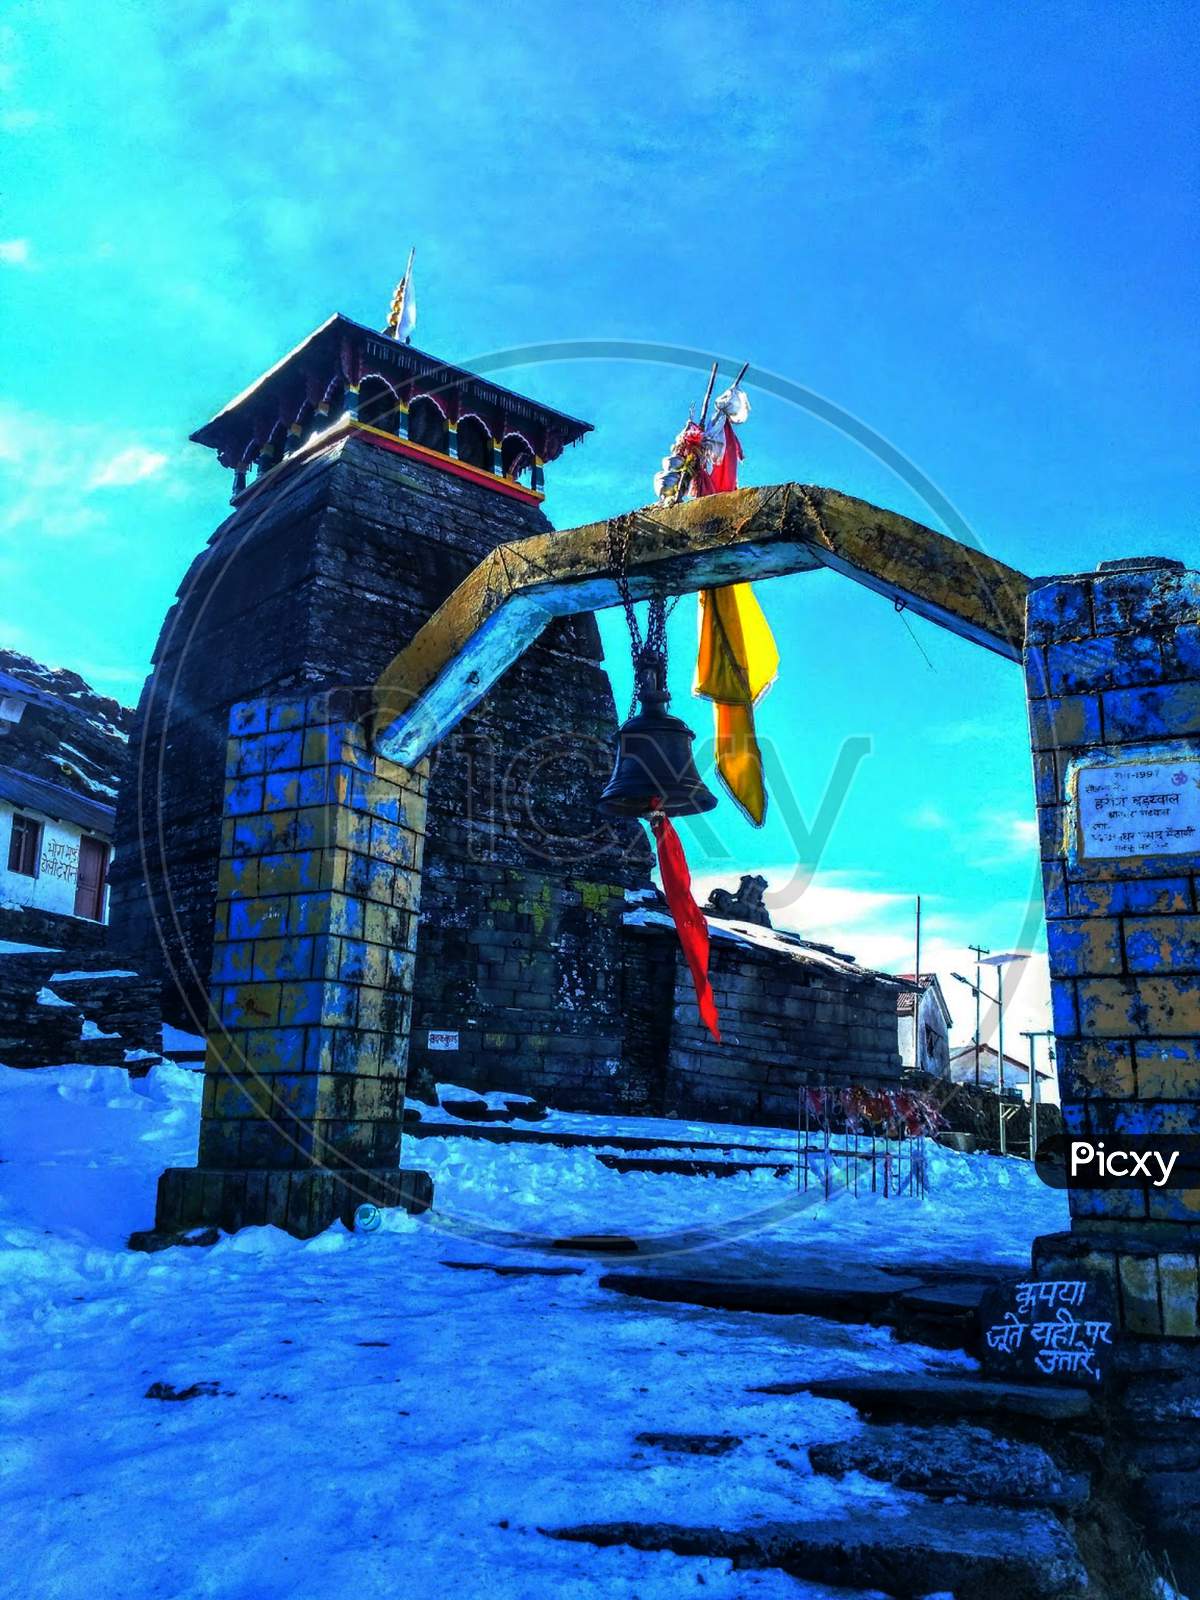 Tungnath Temple is the highest lord shiva temple is located at an altitude of 3,680 m.